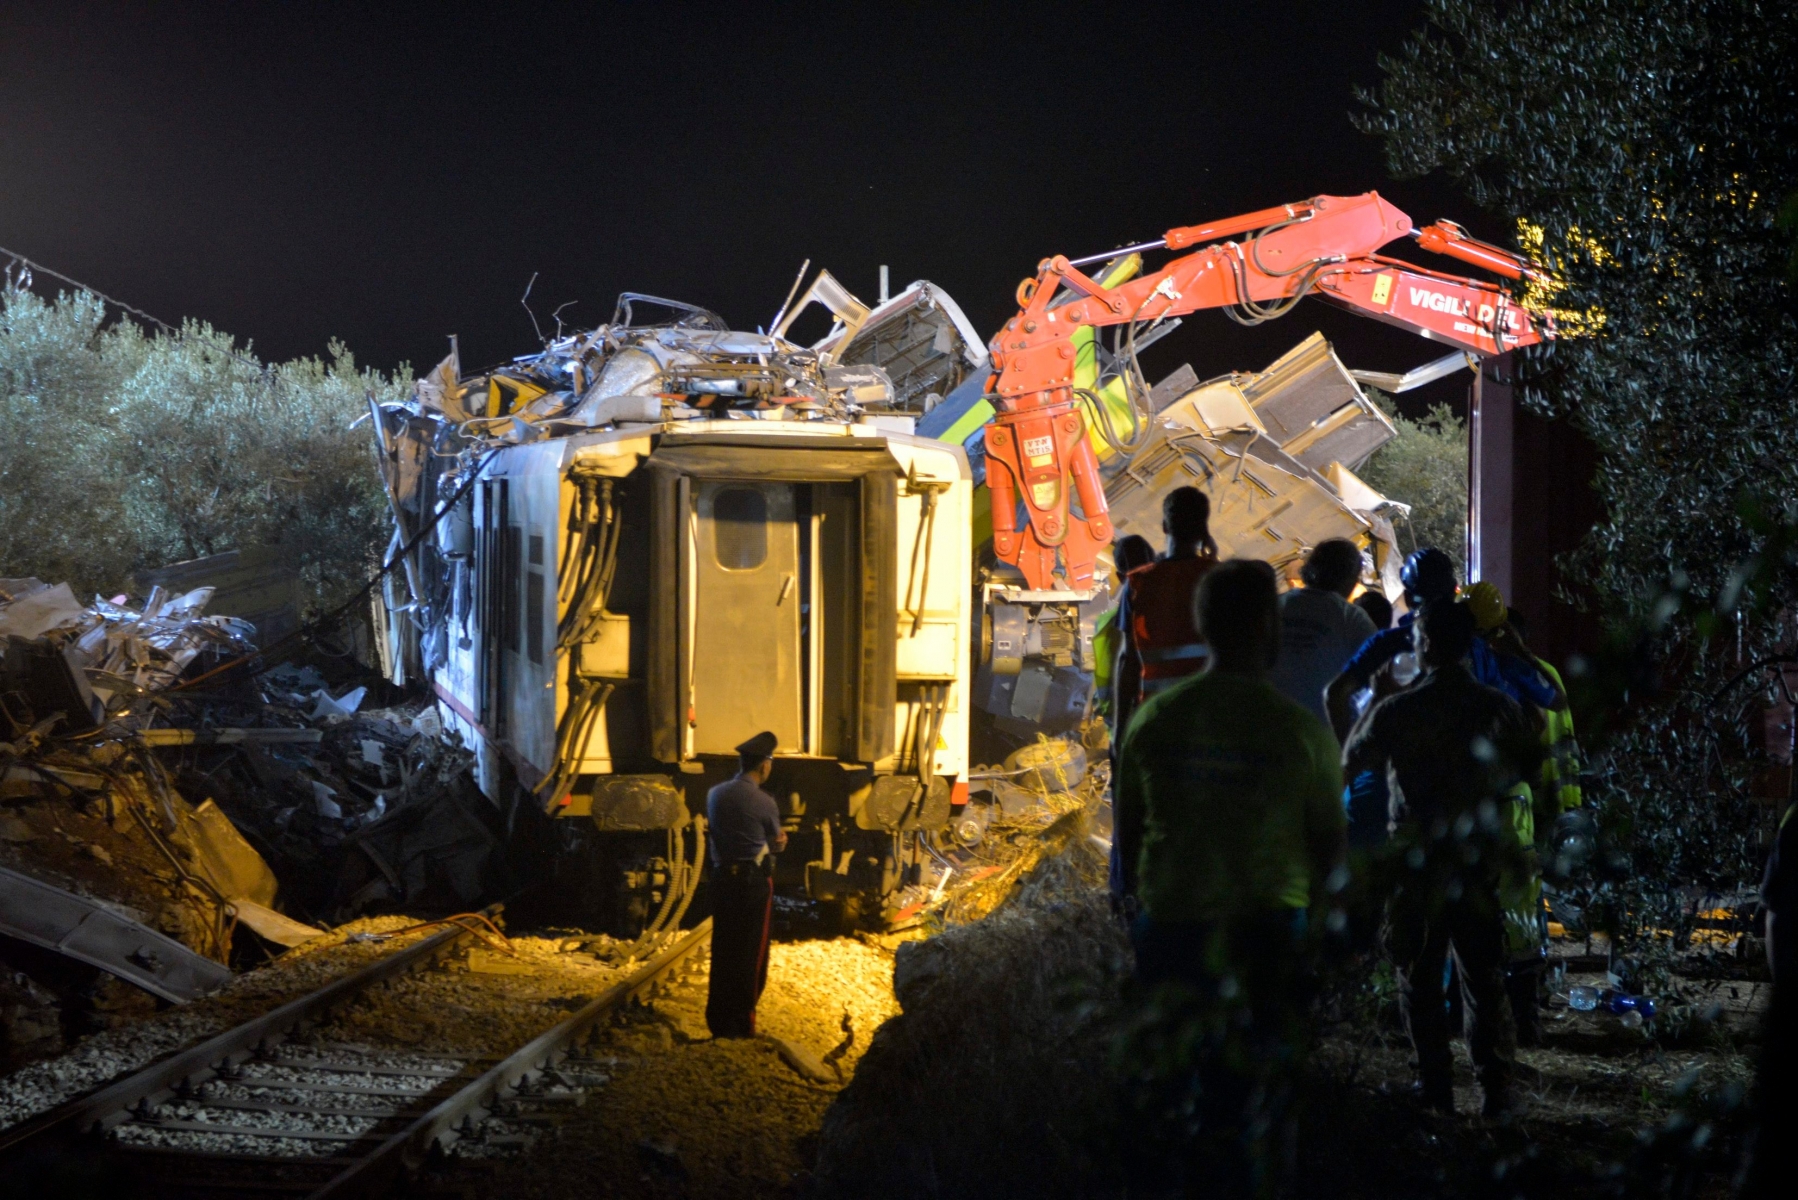 Rescuers works the scene of a train accident after two commuter trains collided head-on near the town of Andria, in the southern region of Puglia, killing several people, Tuesday, July 12, 2016.  (AP Photo/Gaetano Lo Porto) Italy Train Crash